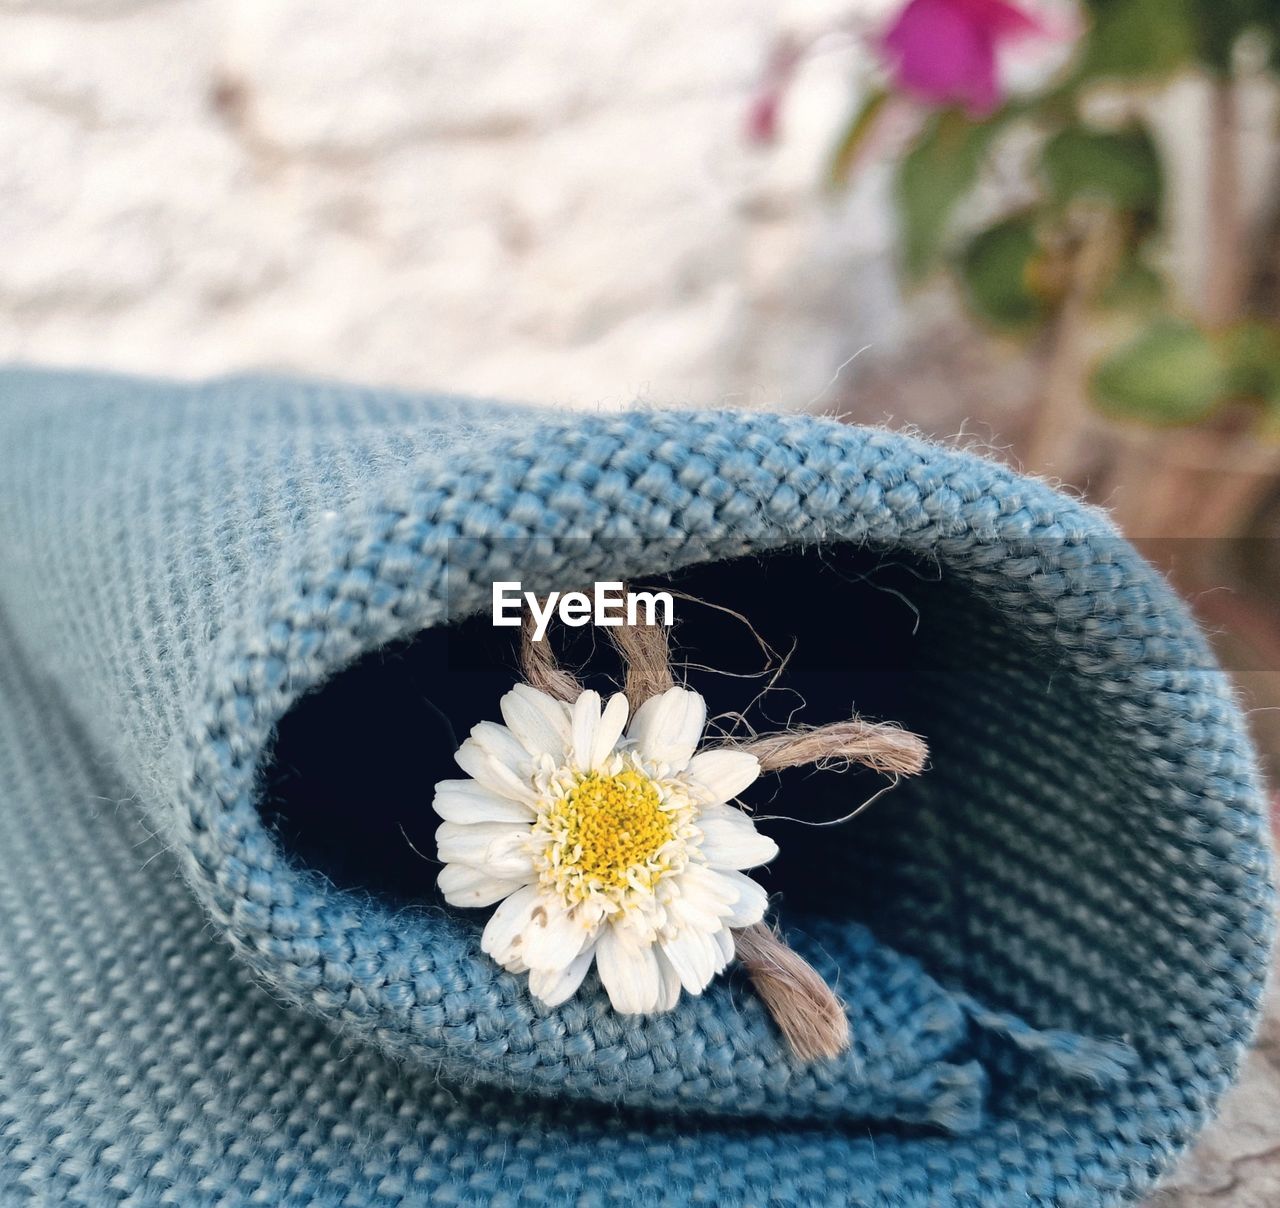 flowering plant, flower, plant, nature, beauty in nature, close-up, blue, freshness, crochet, animal, clothing, animal themes, outdoors, focus on foreground, yellow, no people, textile, fashion accessory, fragility, day, animal wildlife, high angle view, one animal, flower head, wildlife, daisy